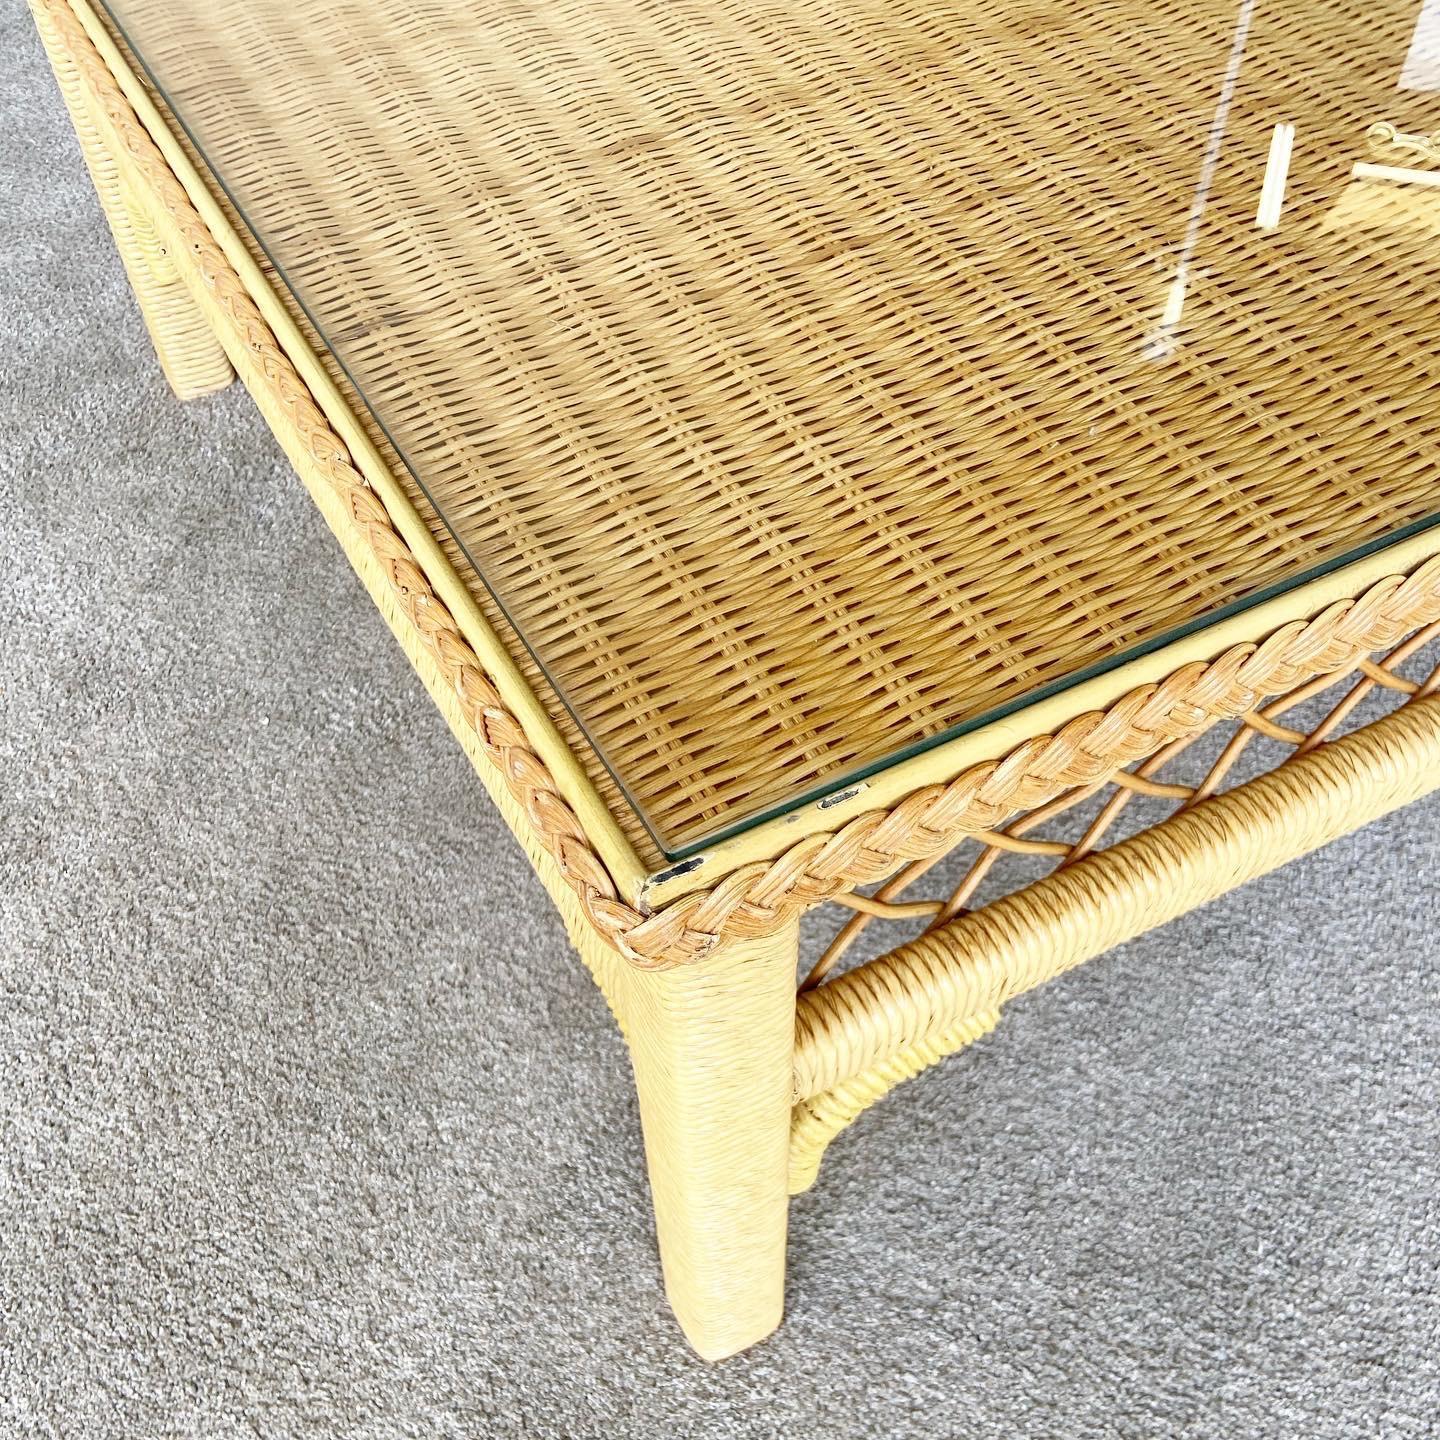 Late 20th Century Boho Chic Wicker Glass Top Coffee Table